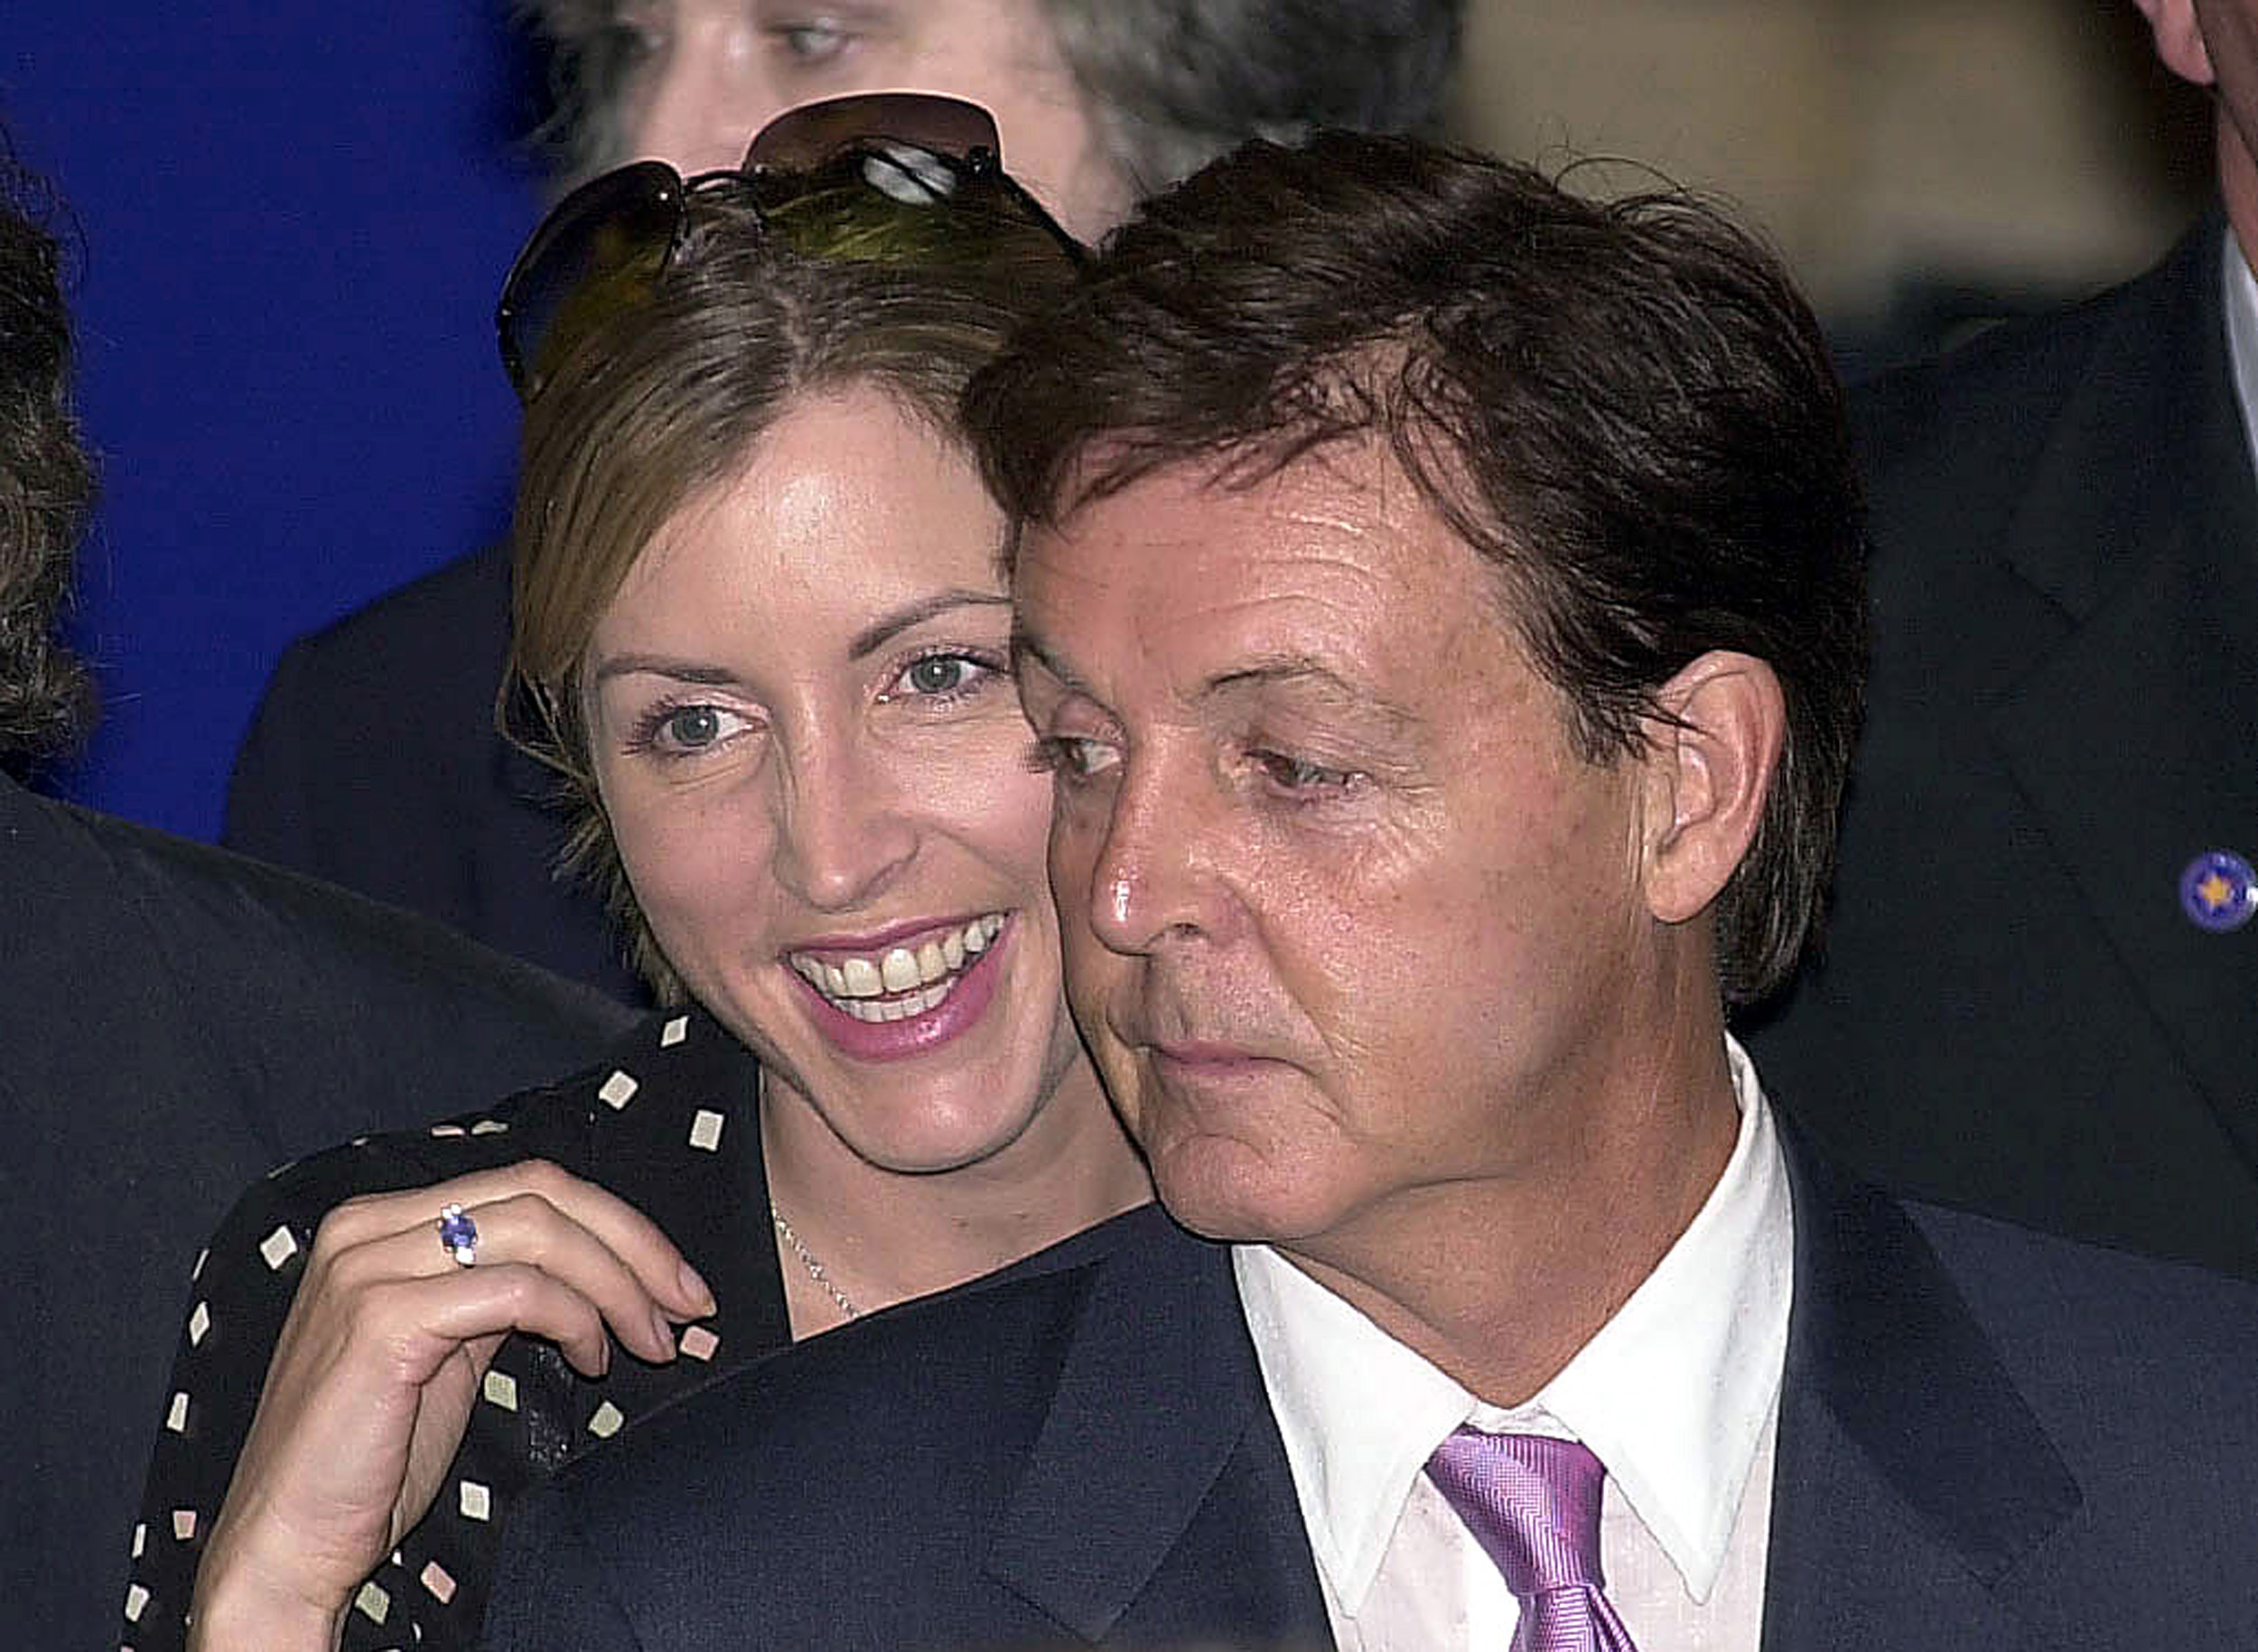 Paul McCartney and Heather Mills in Liverpool in 2002 | Source: Getty Images